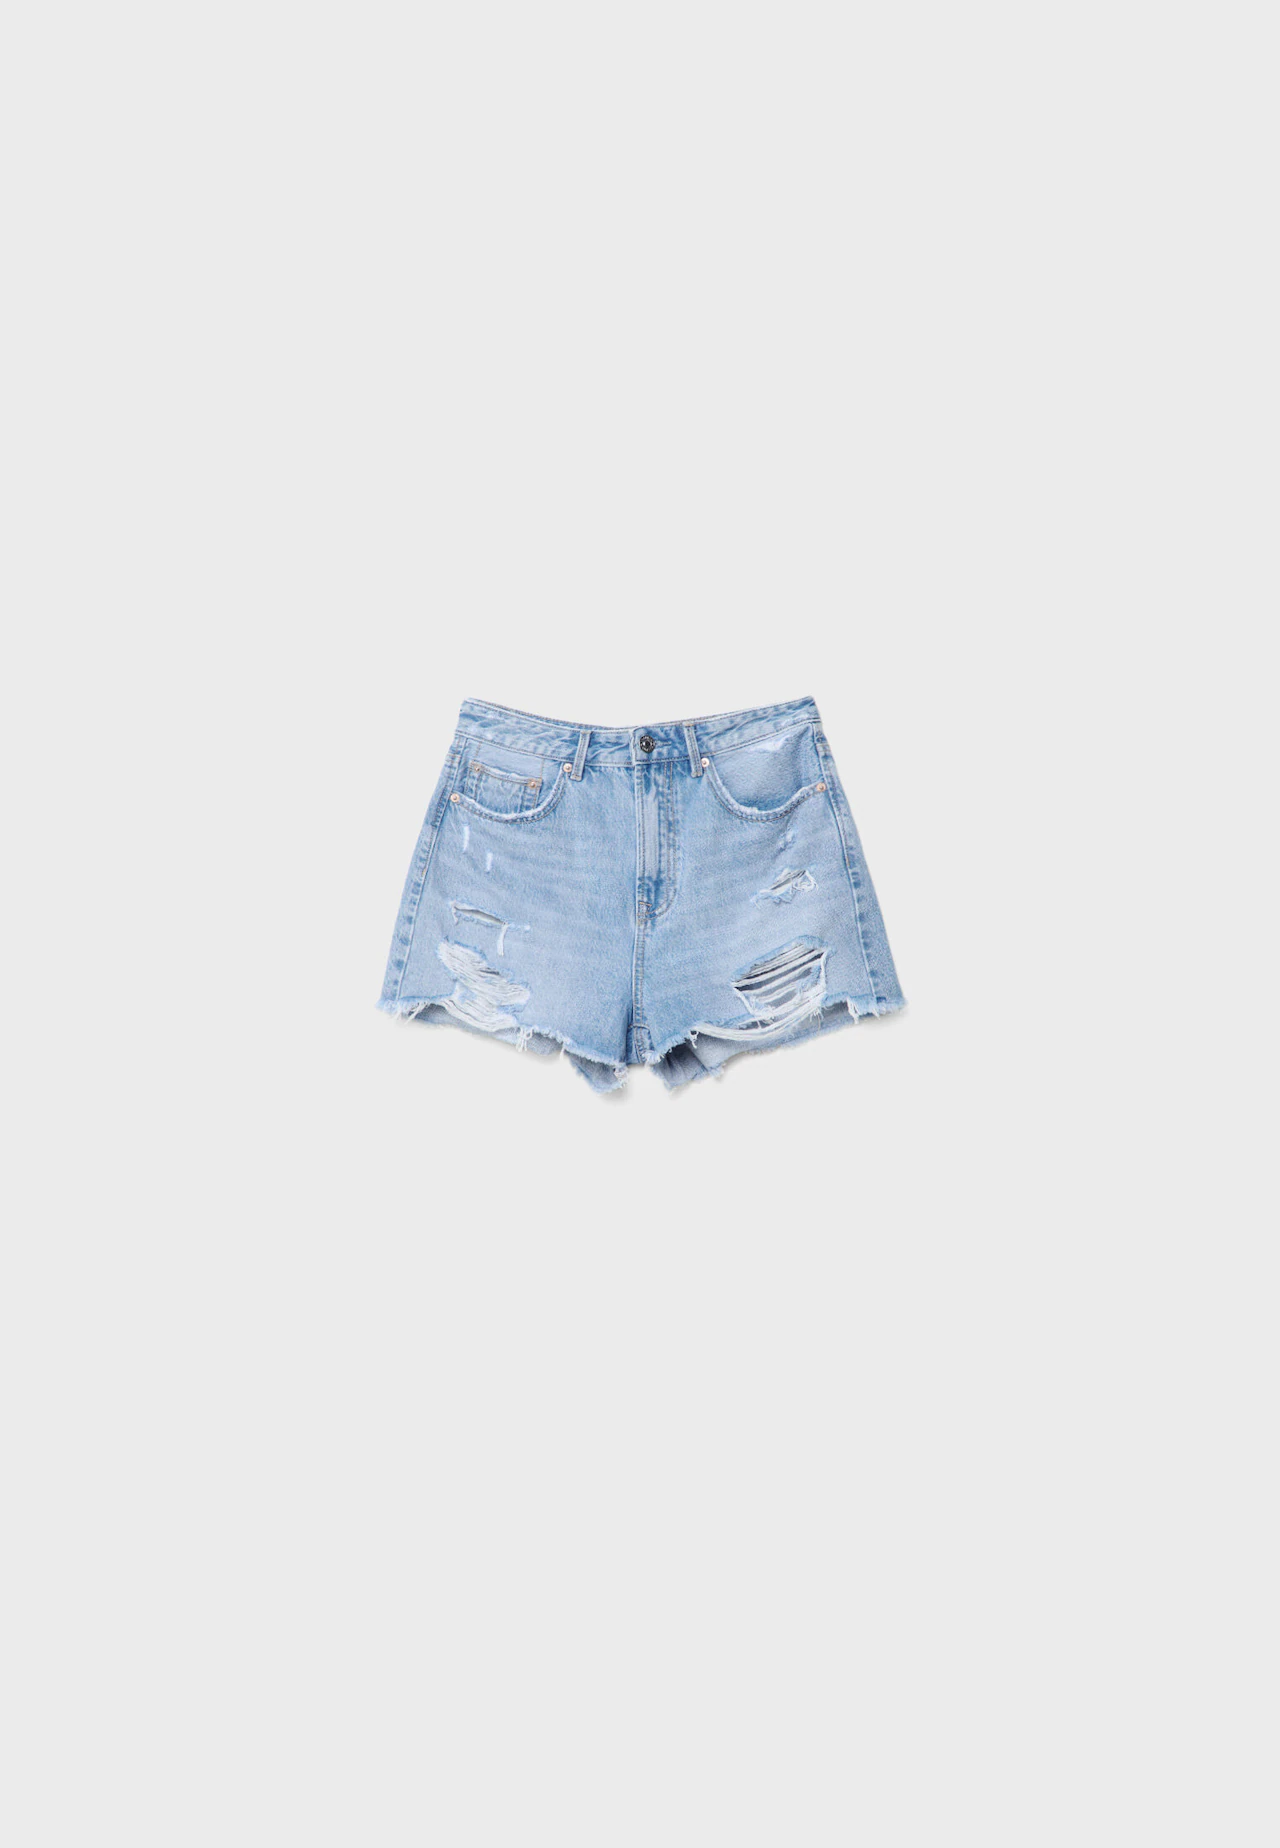 Jeans Shorts Women Ripped Short Jeans Women Short Jeans Women Ladies Denim  Shorts Jean Shorts (Color : Light Blue, Size : S.) : : Clothing,  Shoes & Accessories